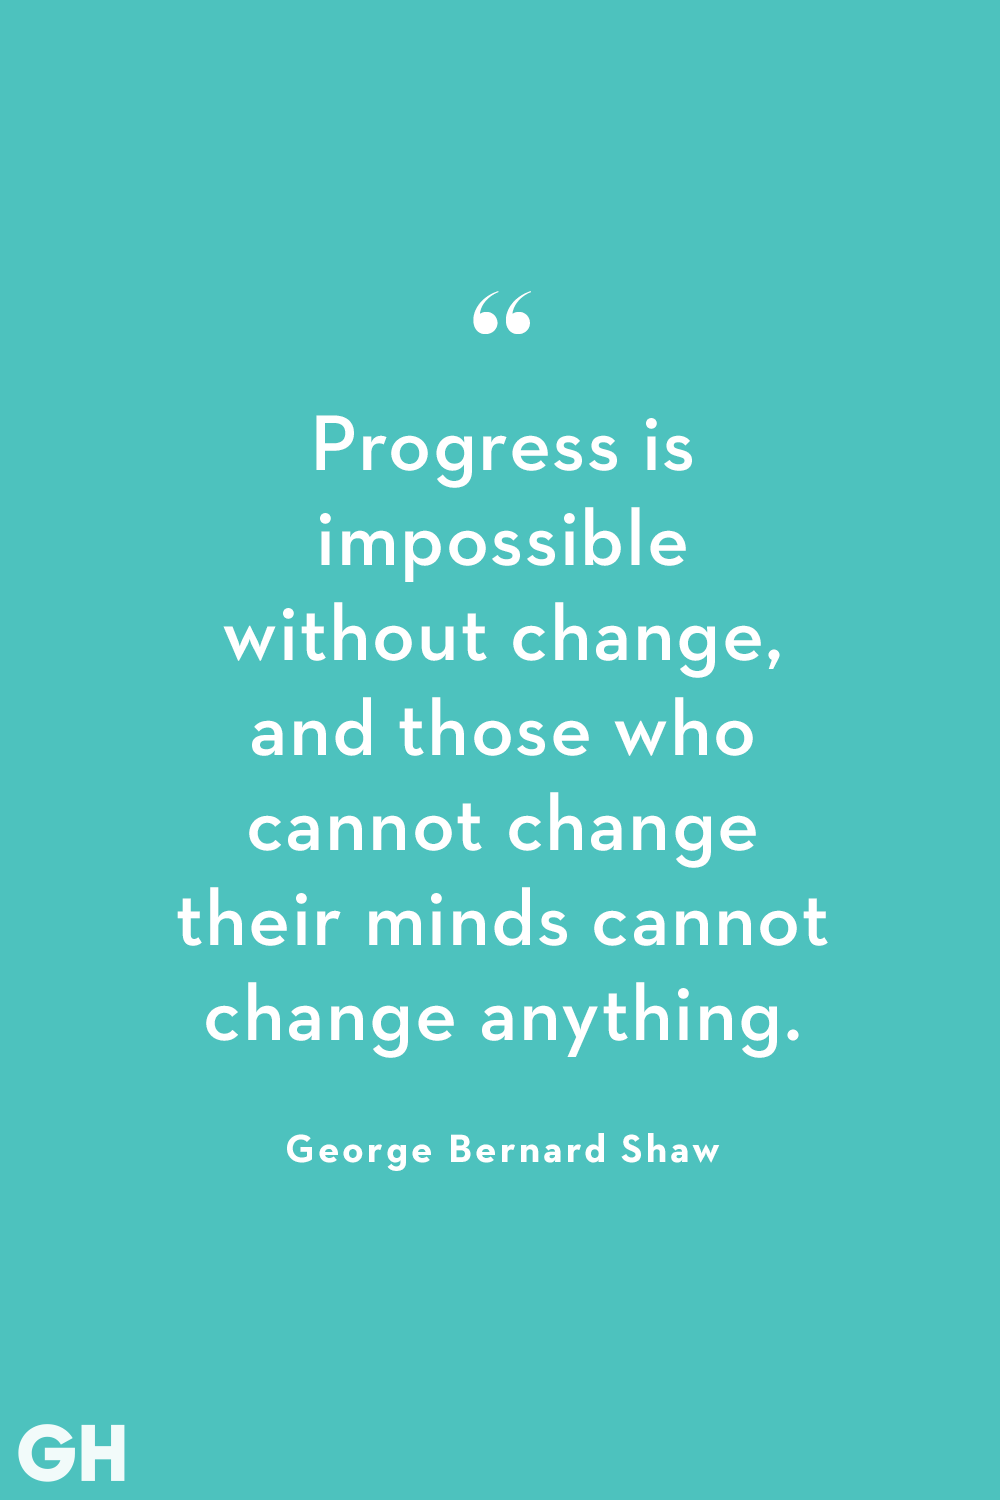 https://hips.hearstapps.com/hmg-prod/images/quotes-about-change-george-bernard-shaw-1548343271.png